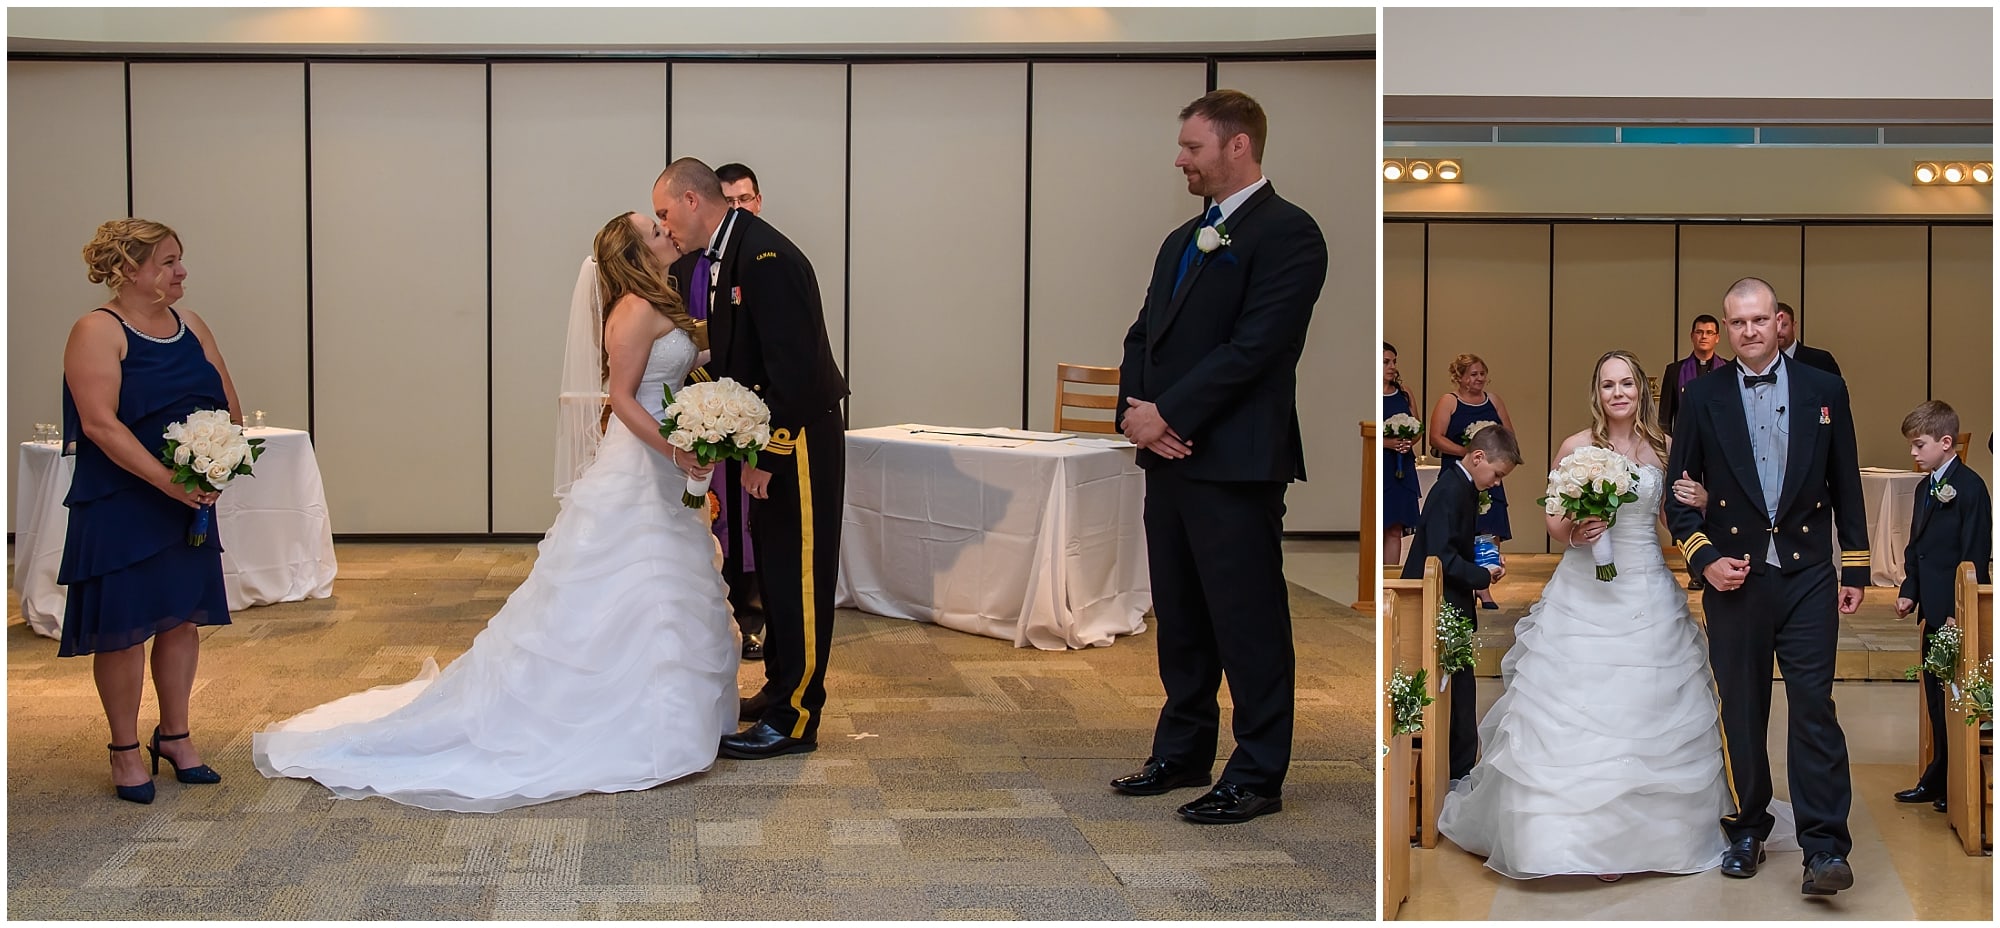 The bride and groom have their first kiss during their wedding at Juno Tower in Halifax.